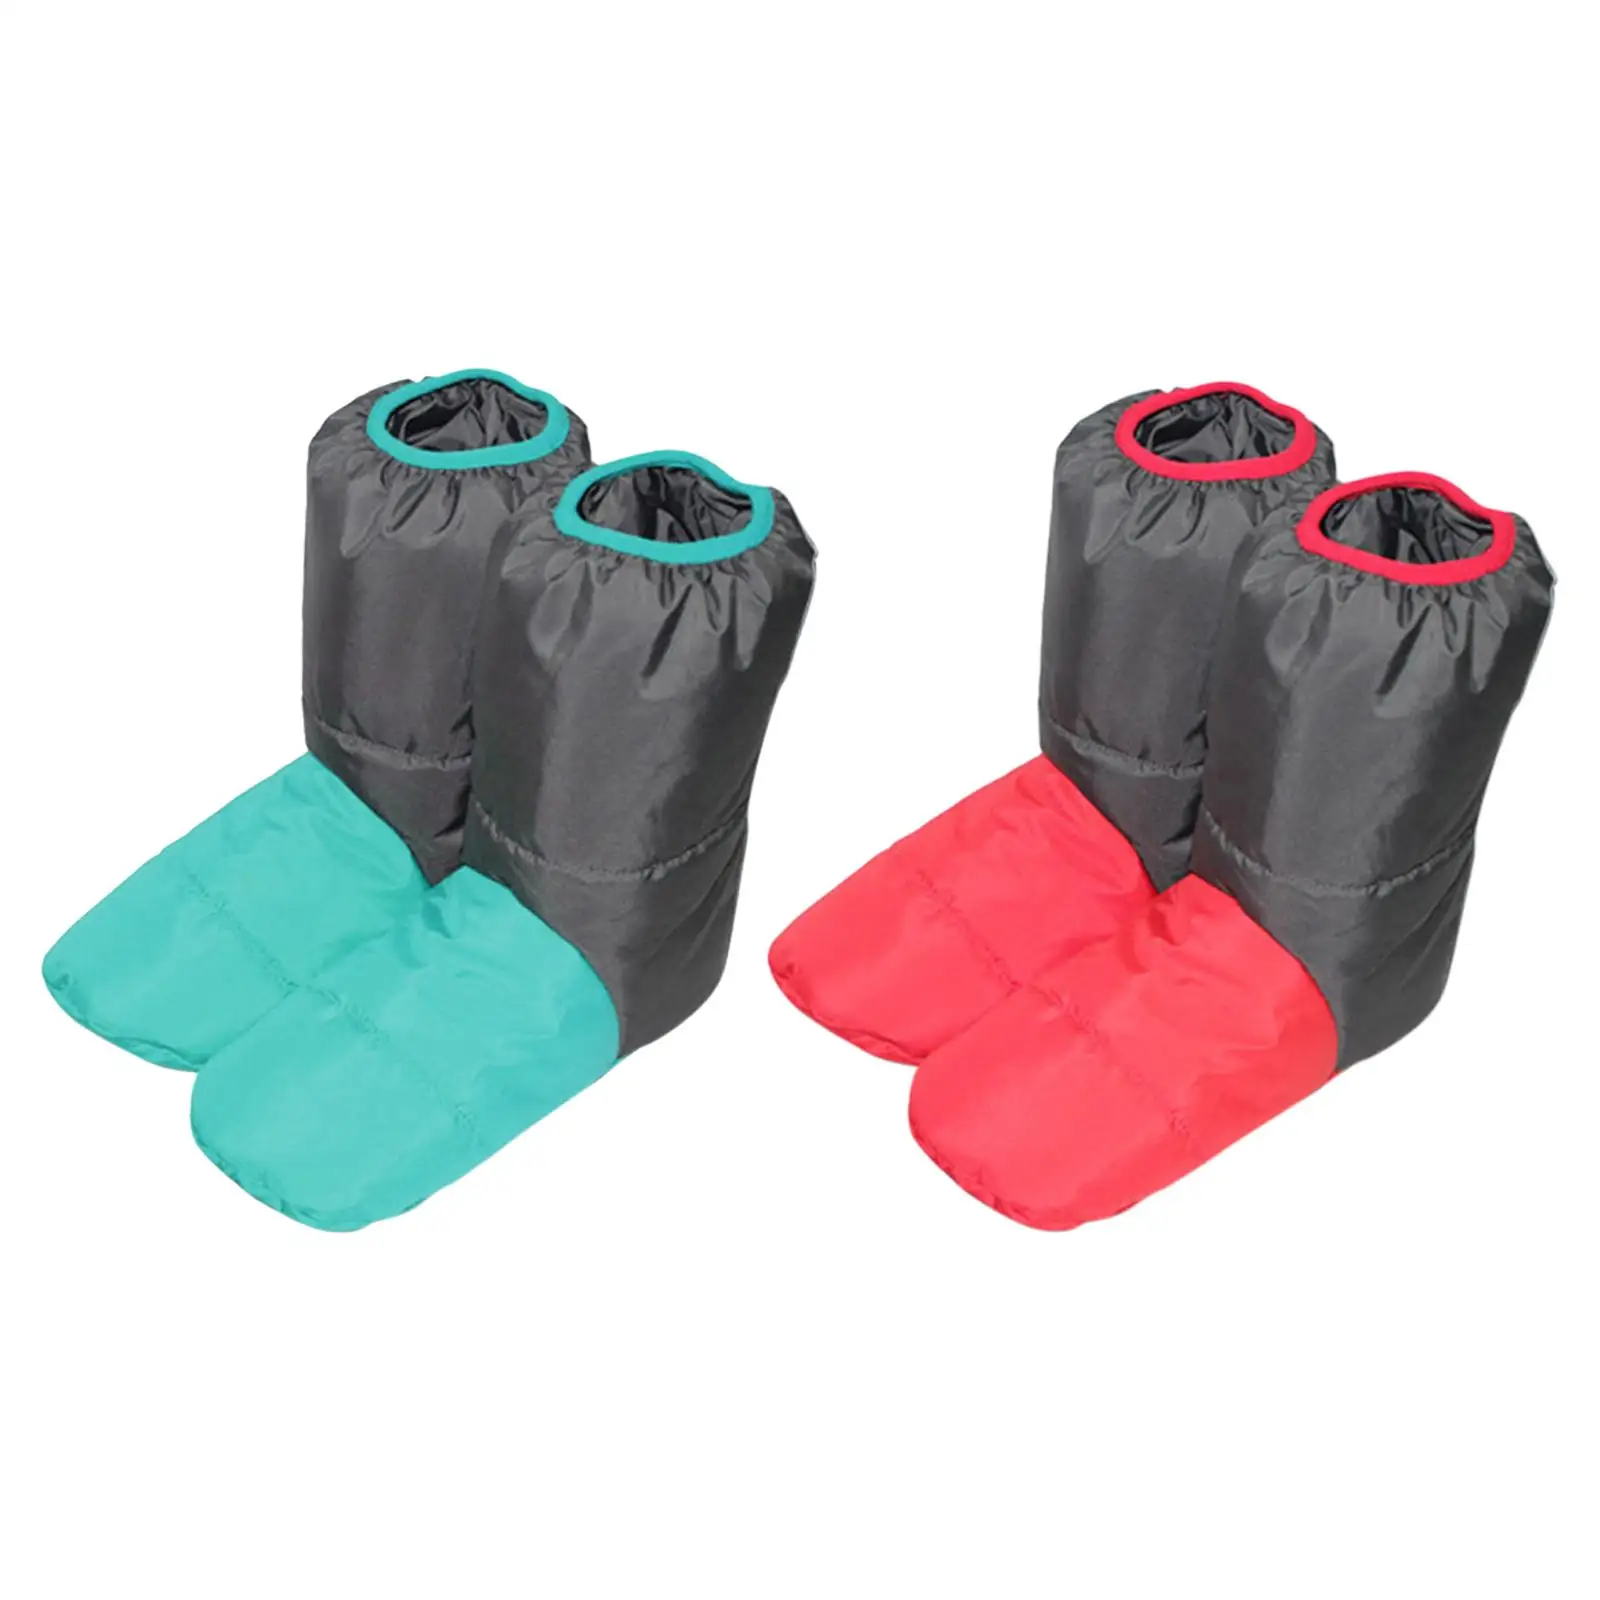 Down Booties Slippers Breathable Ultralight Anti Skid Down Boots Warm Socks for Camping Bed Hiking Home Snowboarding